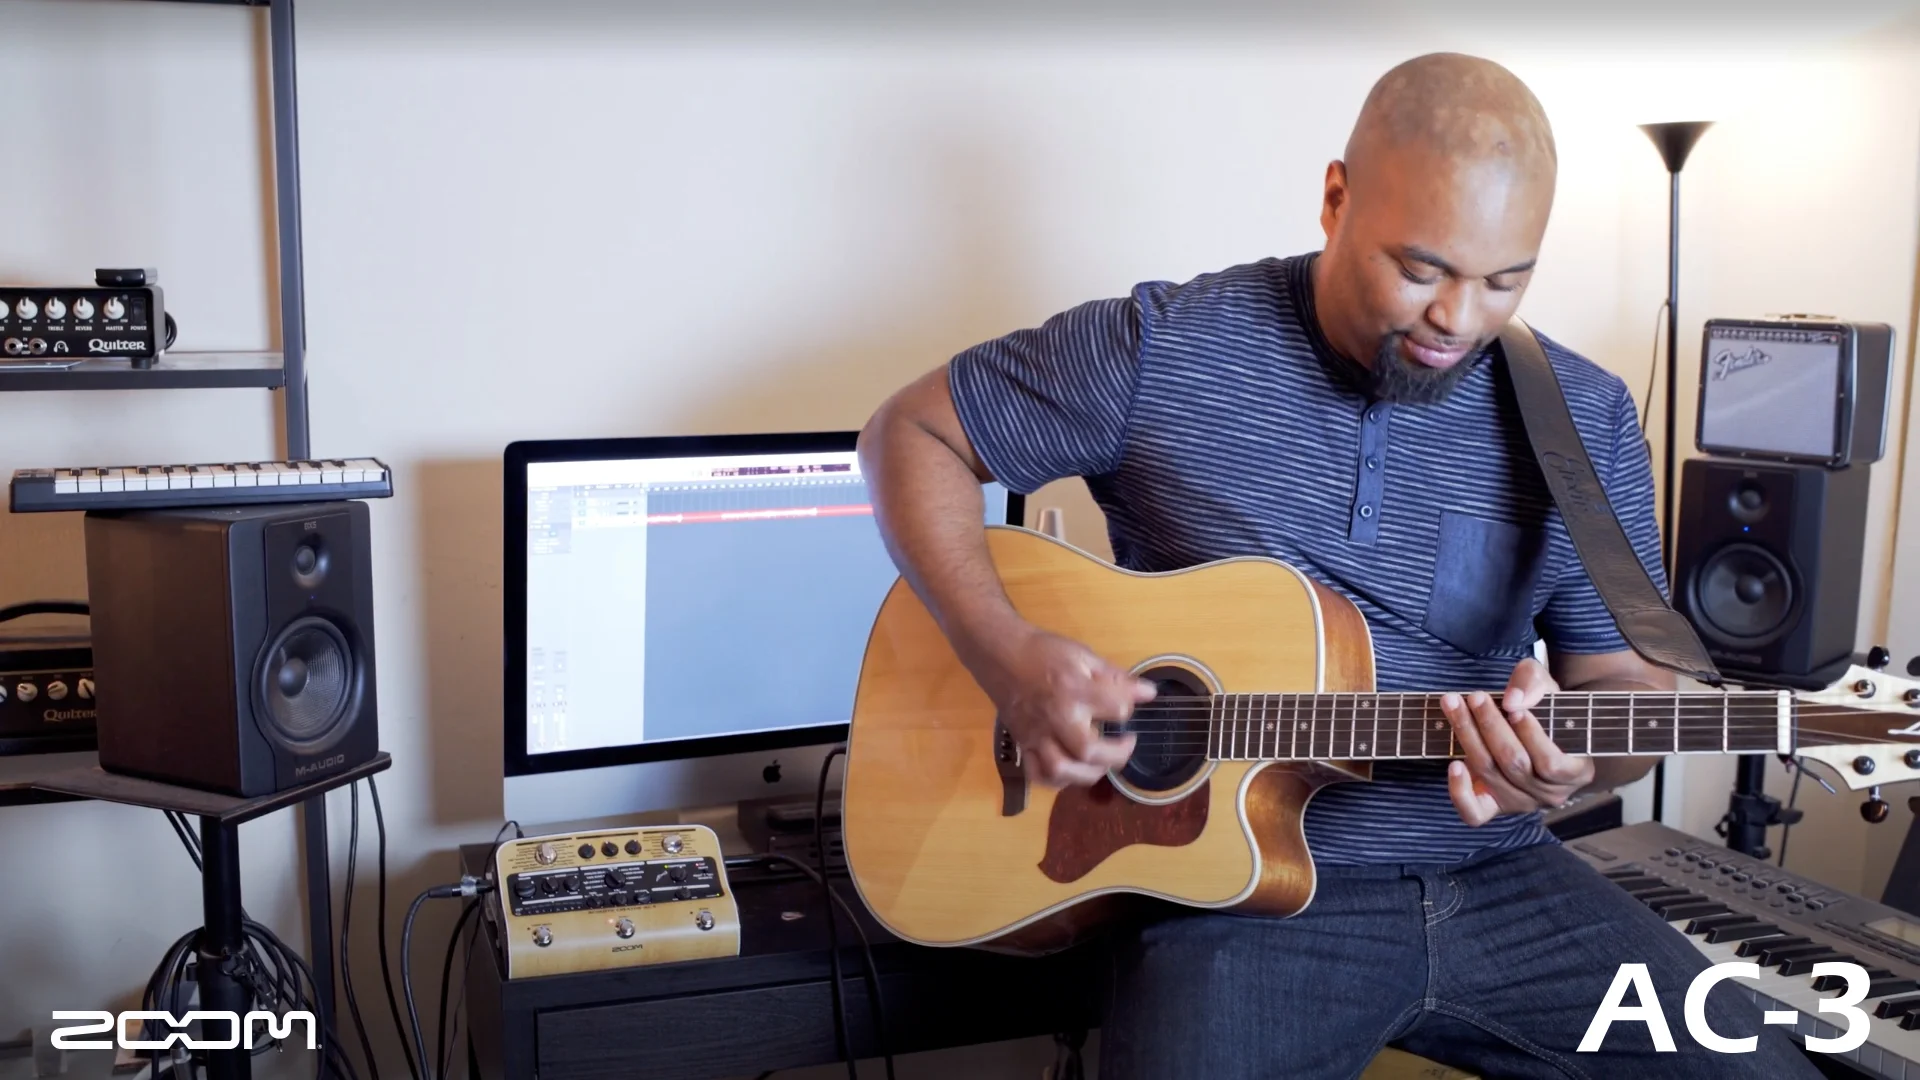 The Zoom AC-3 Acoustic Creator: Kyle Bolden and AC-3 features/effects